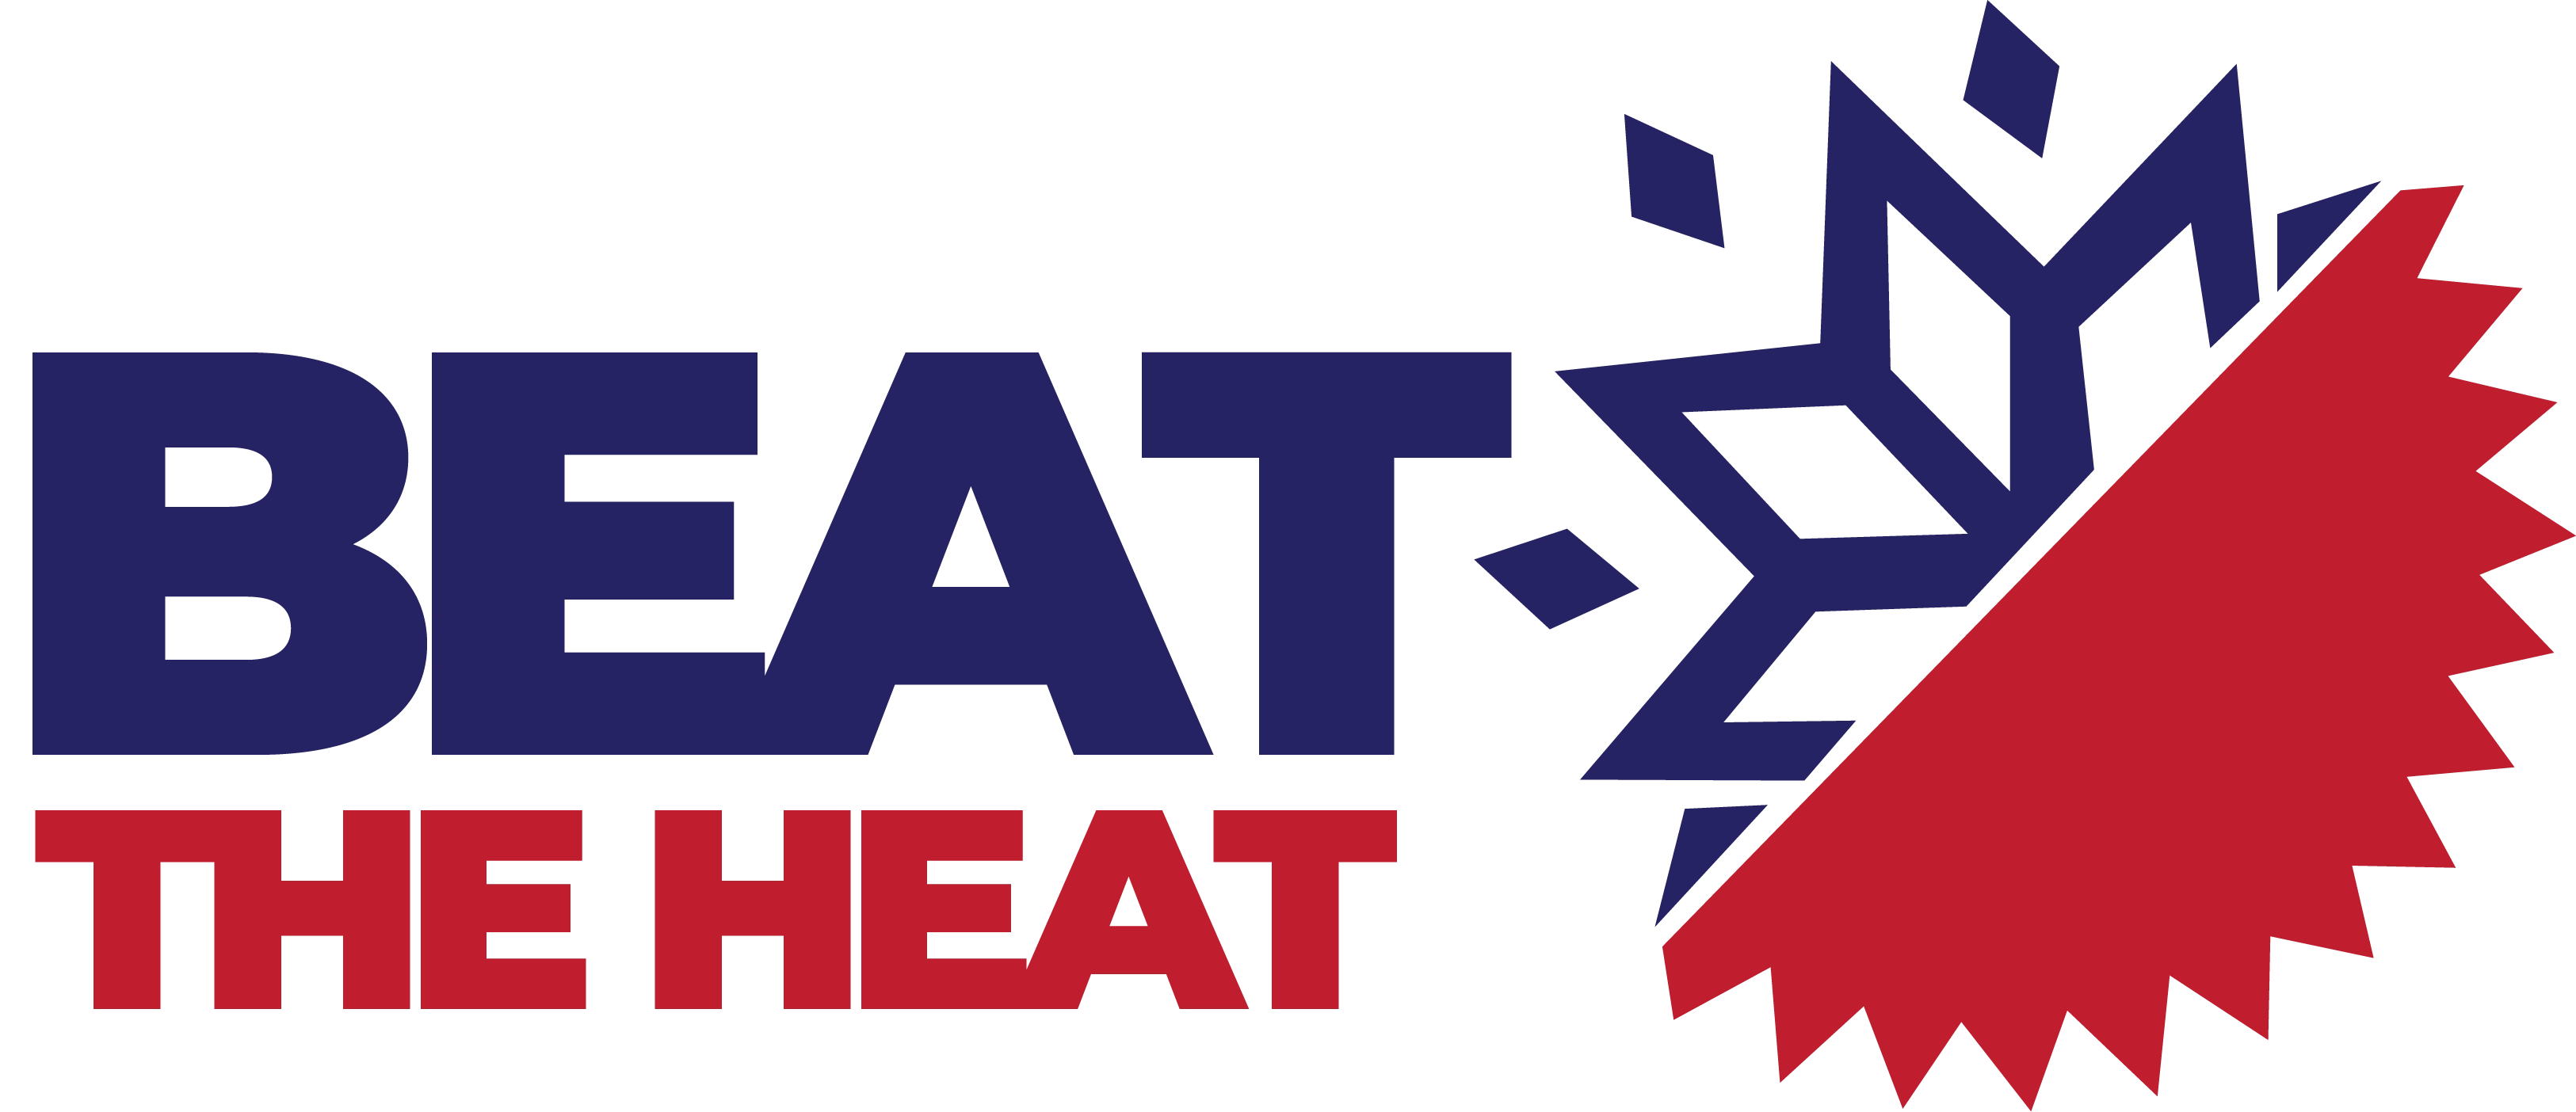 Beat The Heat Air Conditioning Corporation Logo